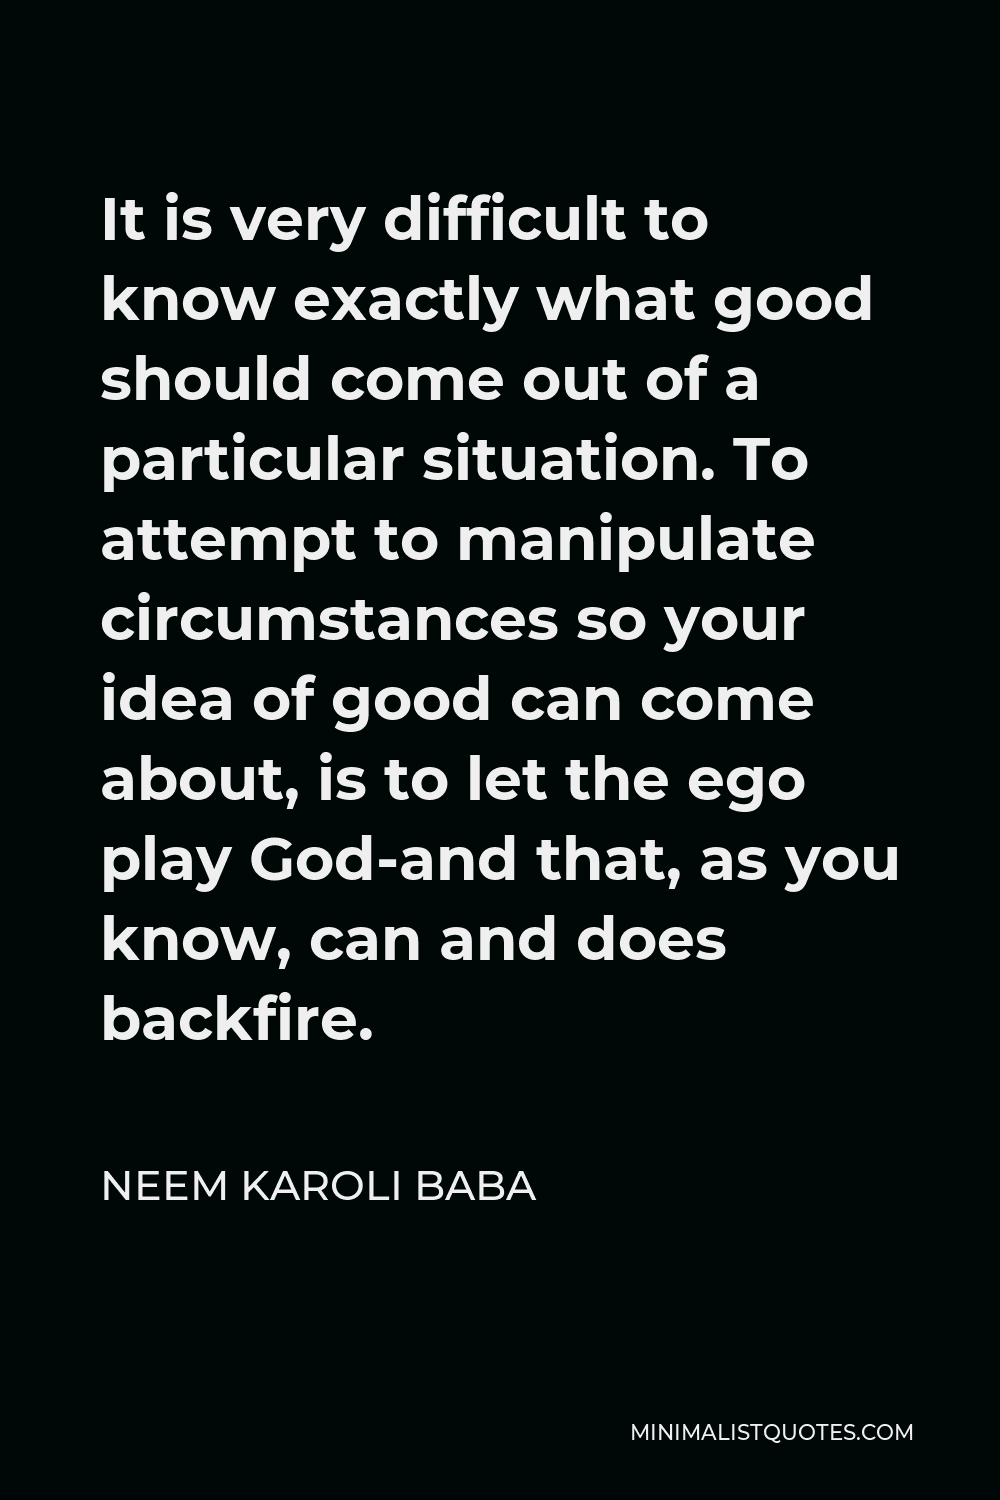 Neem Karoli Baba Quote - It is very difficult to know exactly what good should come out of a particular situation. To attempt to manipulate circumstances so your idea of good can come about, is to let the ego play God-and that, as you know, can and does backfire.